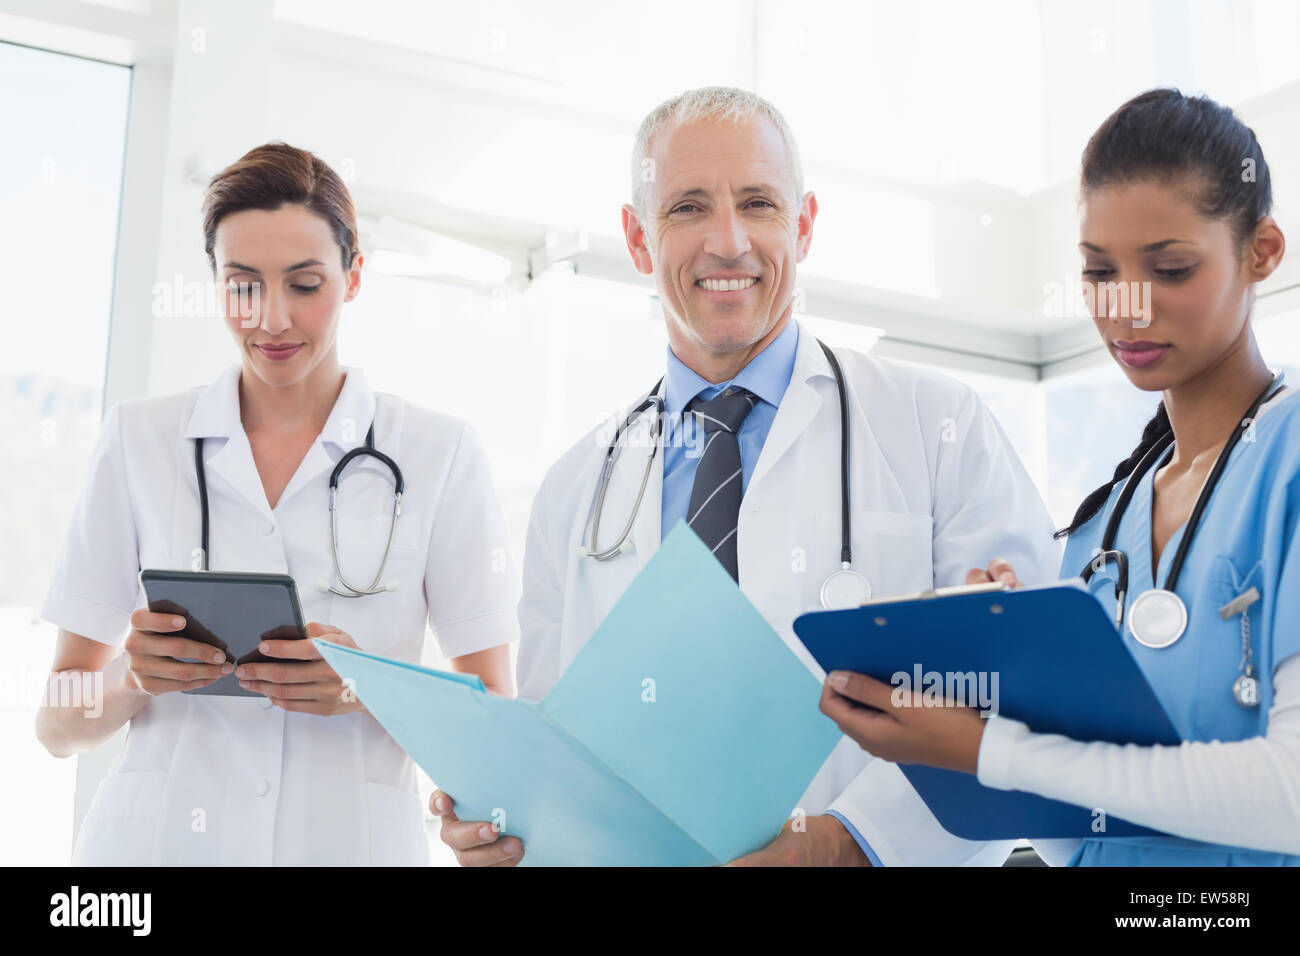 Doctors working together on patients file Stock Photo